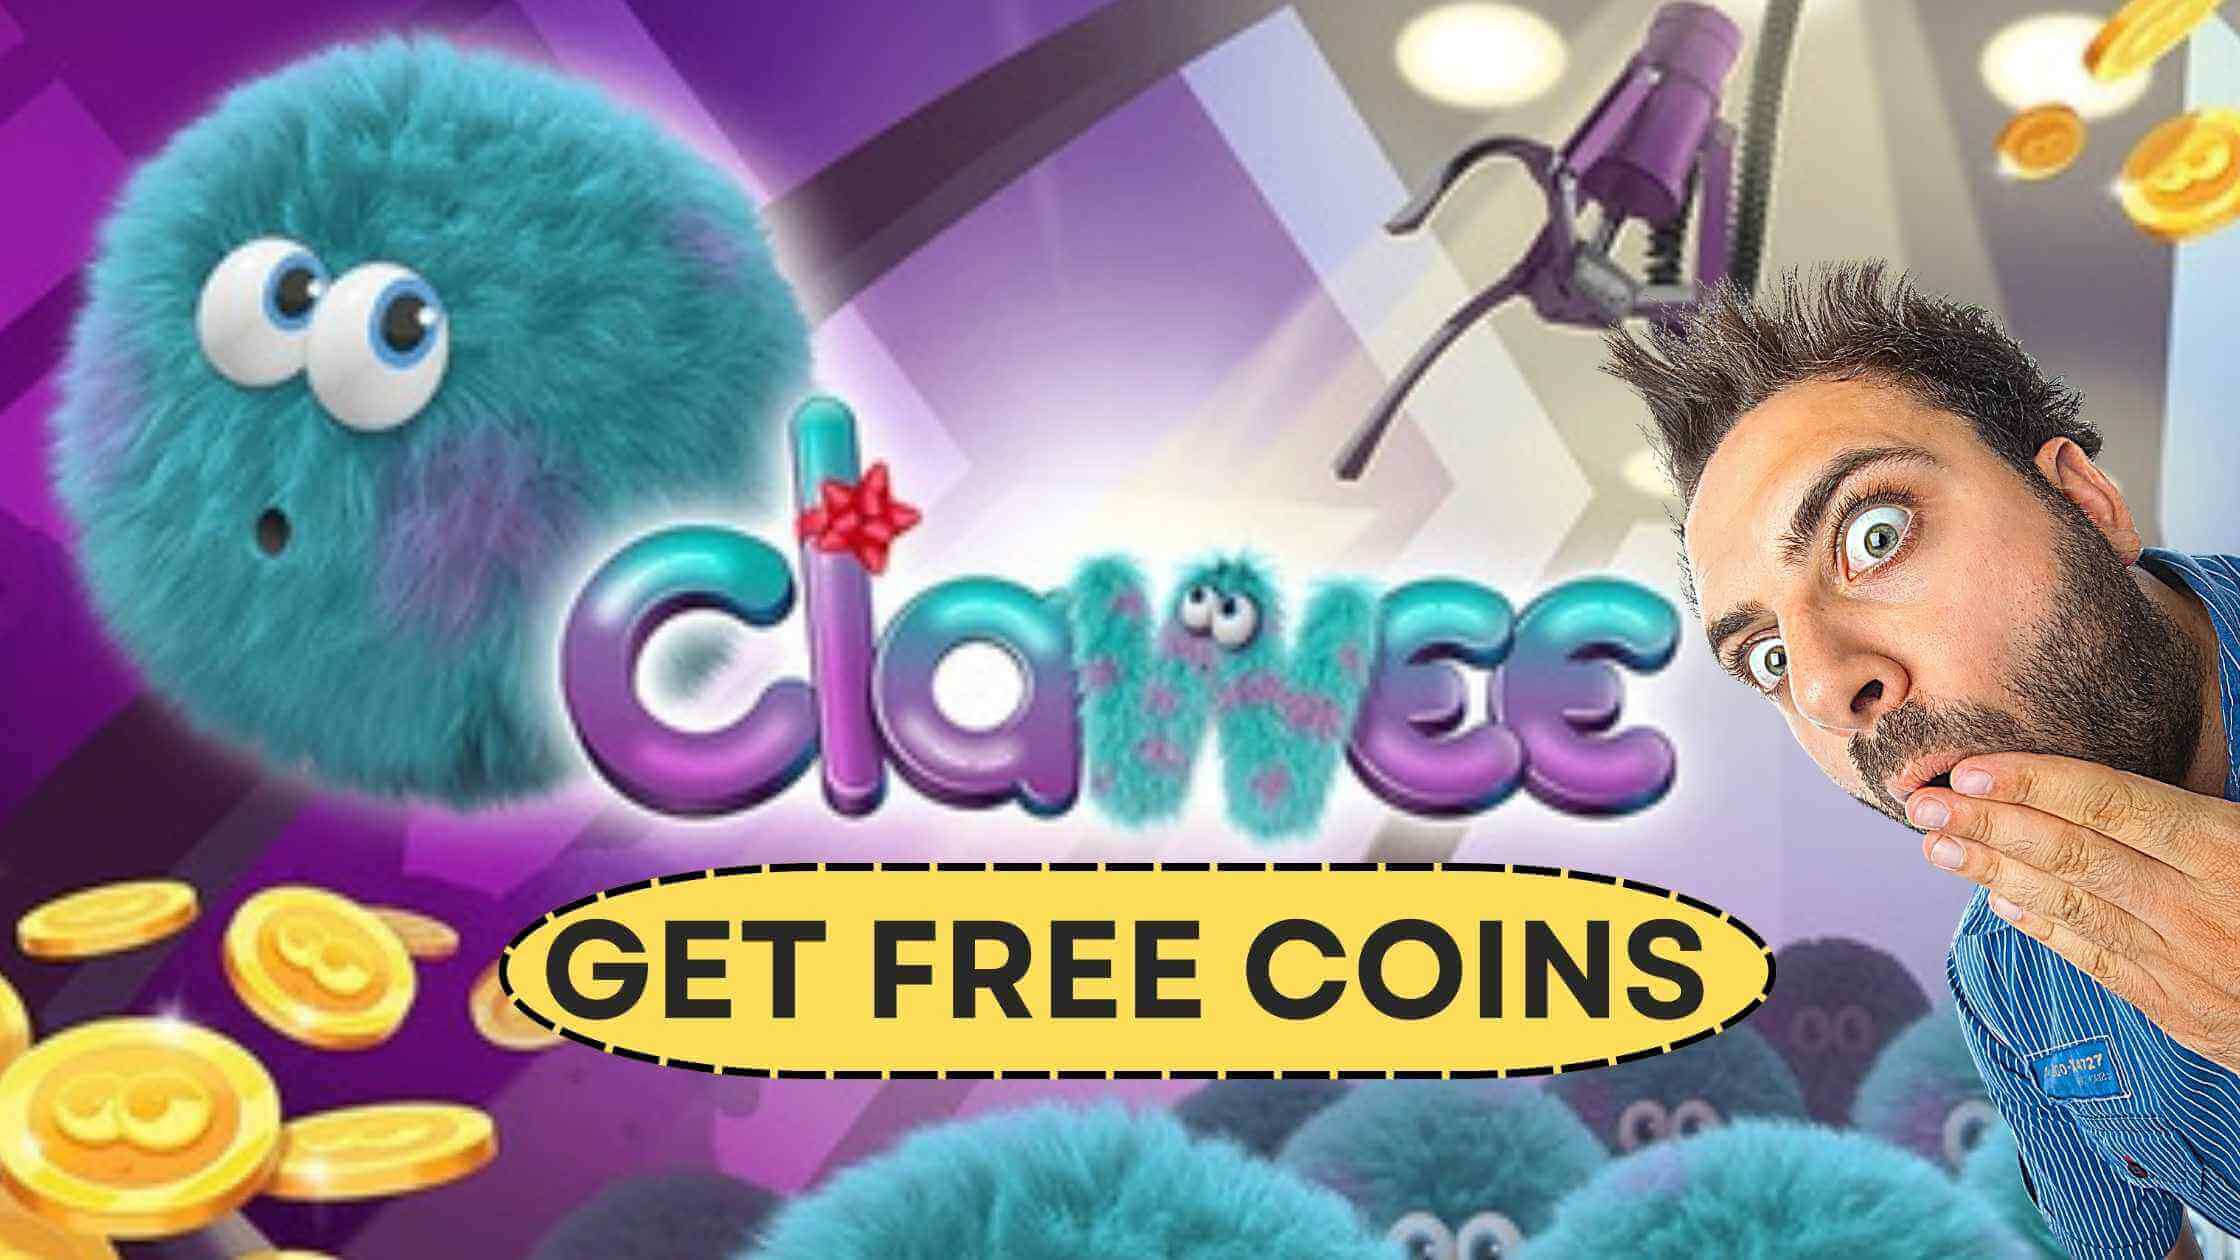 How to Get Free Coins on Clawee